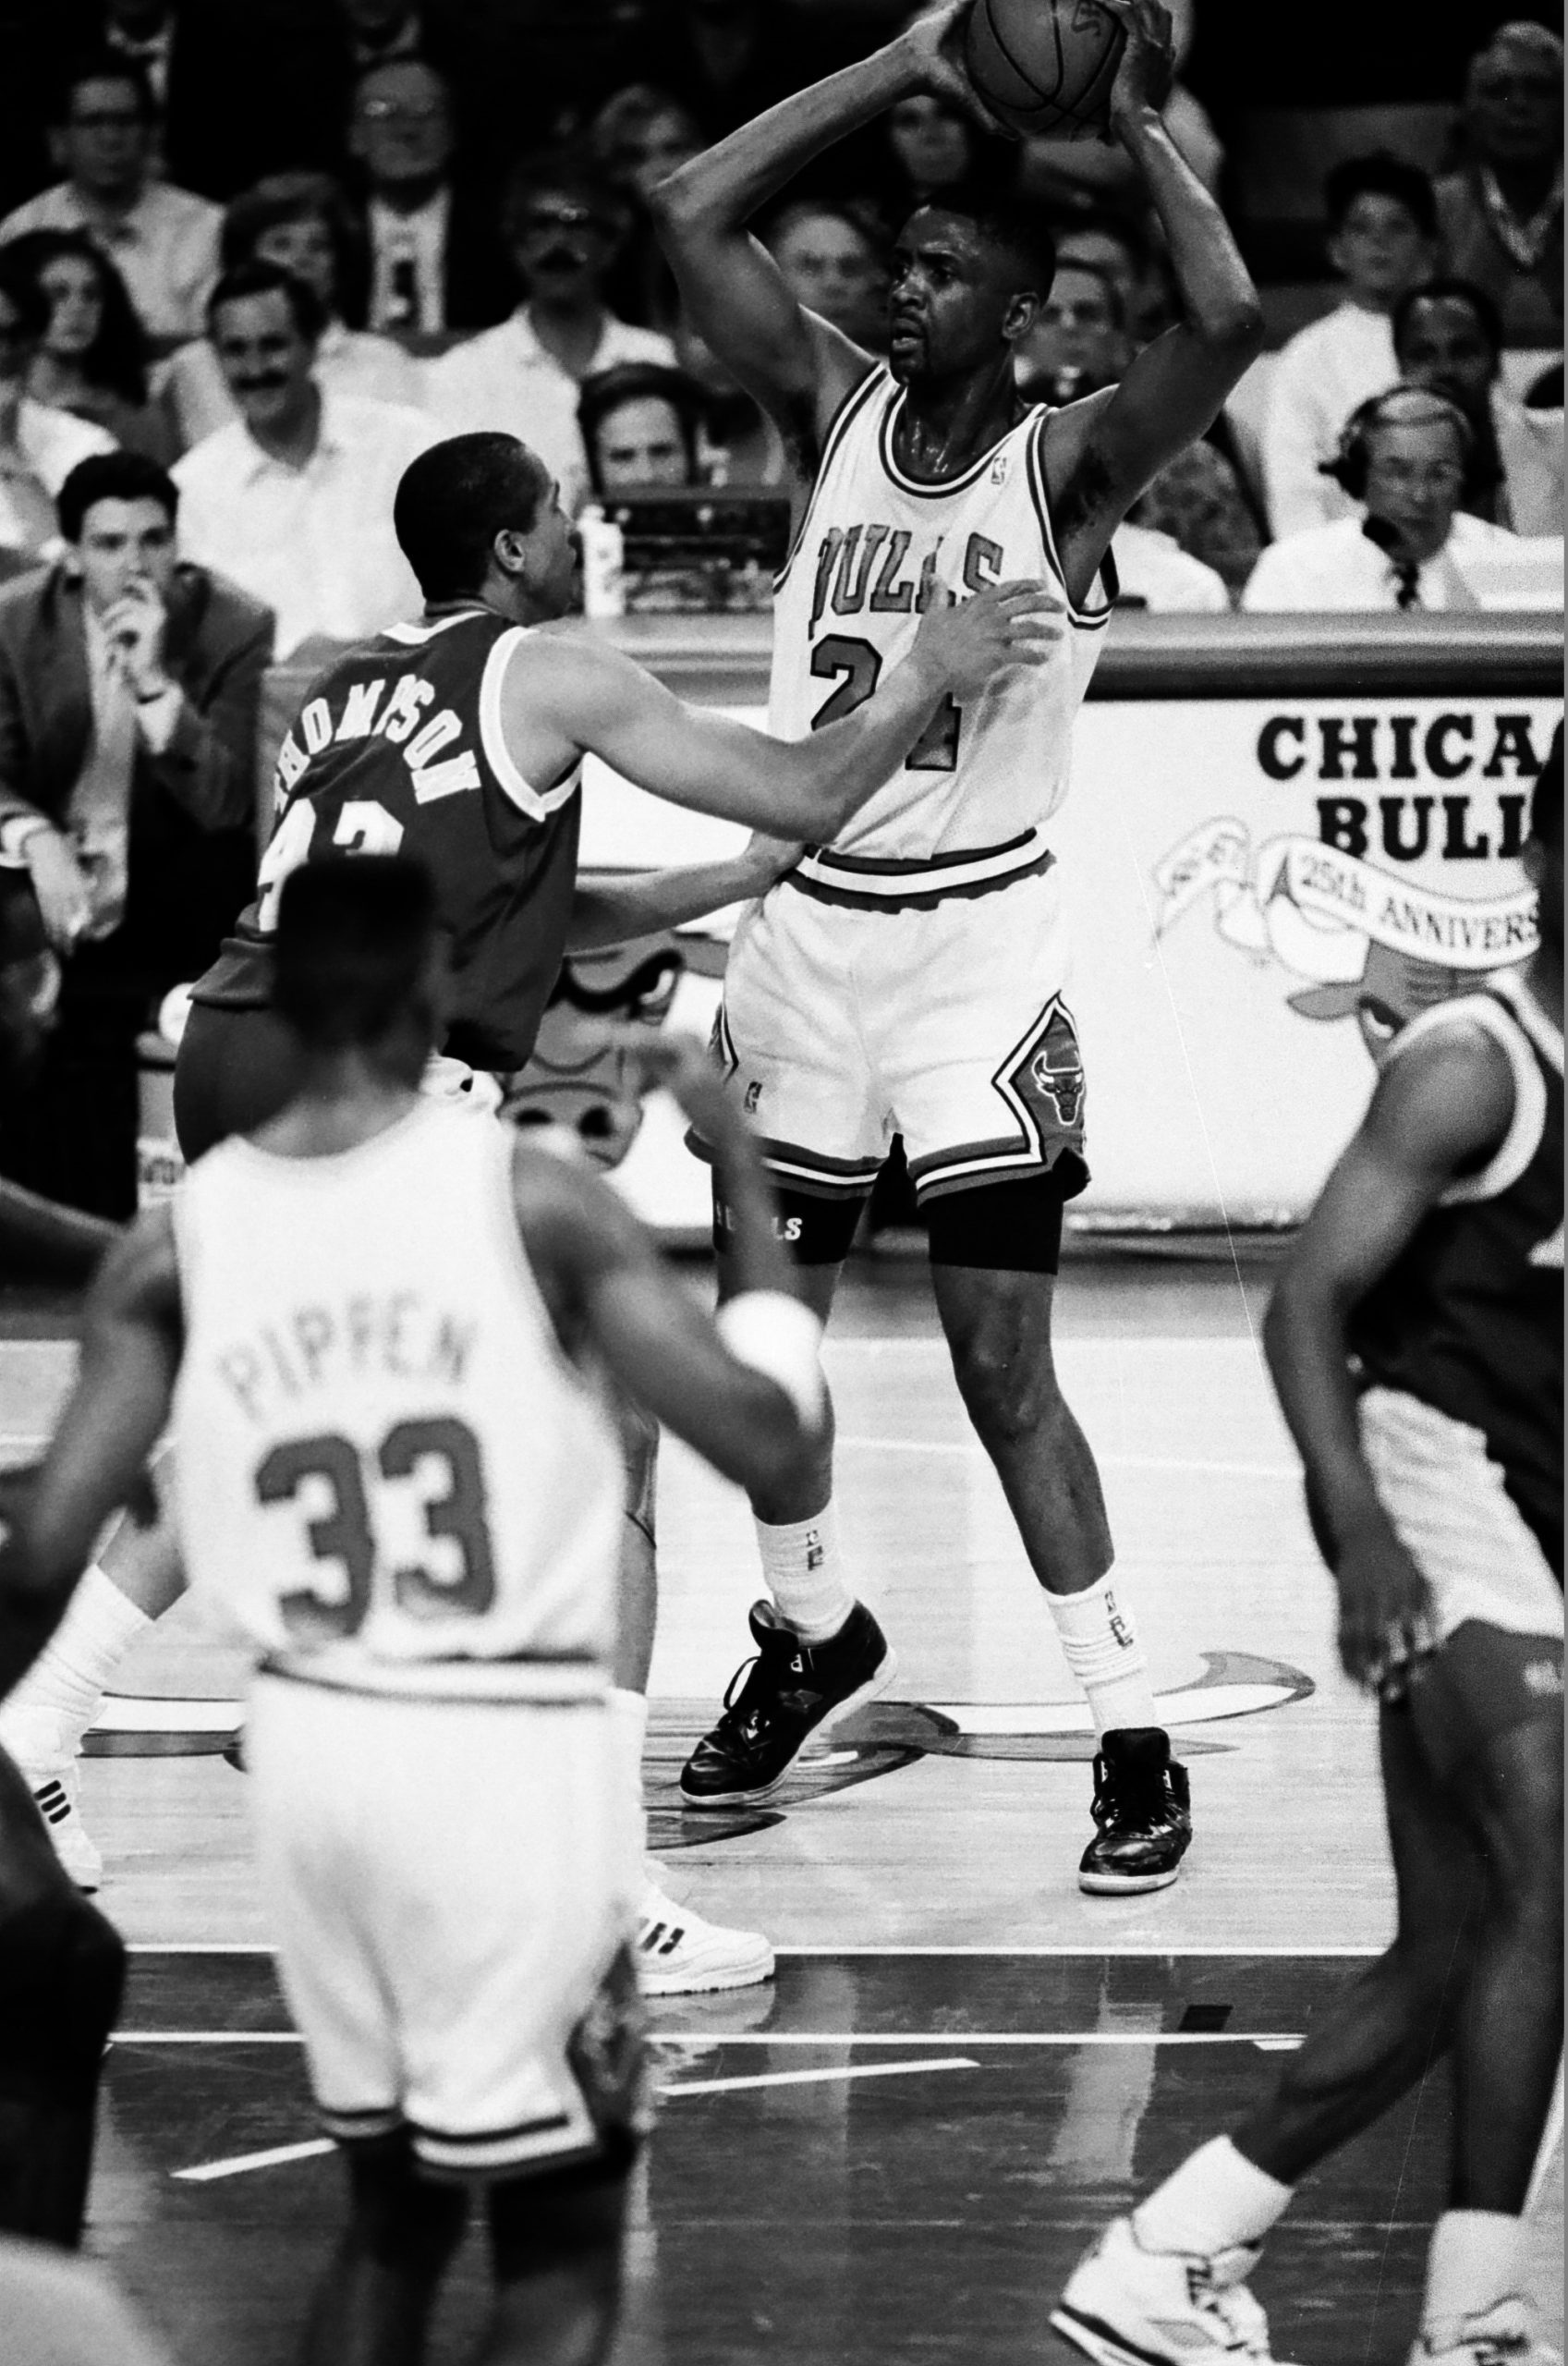 In the middle of a game Bill Cartwright is guarded with the ball looking to pass